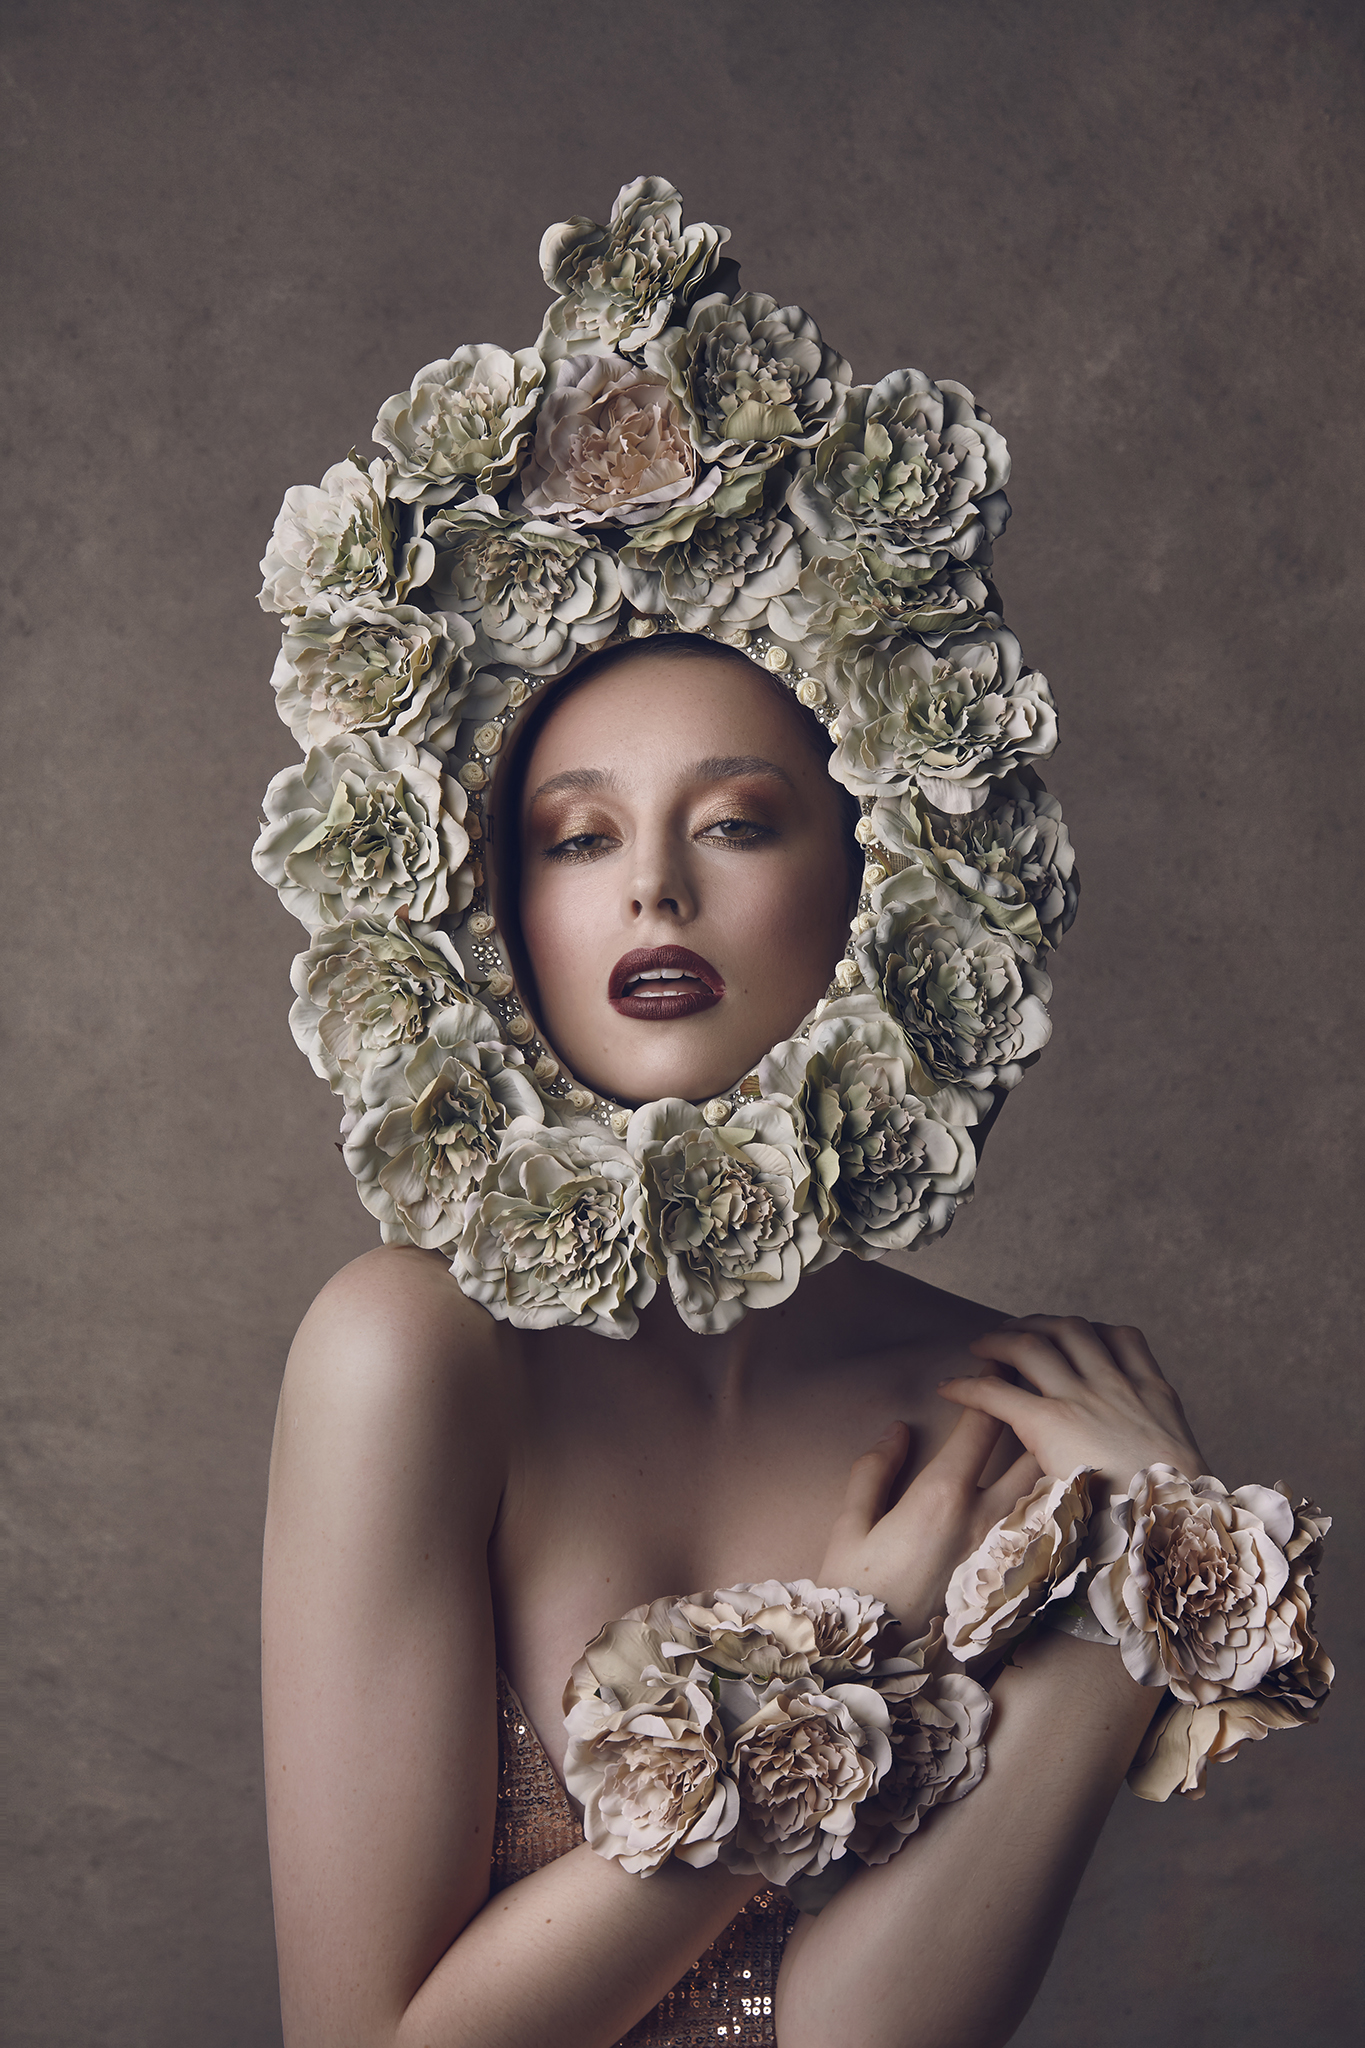 The-Flower-Book-by-Dana-Cole-floral-headpiece-model-fashion-photography-fine-art-photography-beauty-photo-floral-shoot-4.jpg